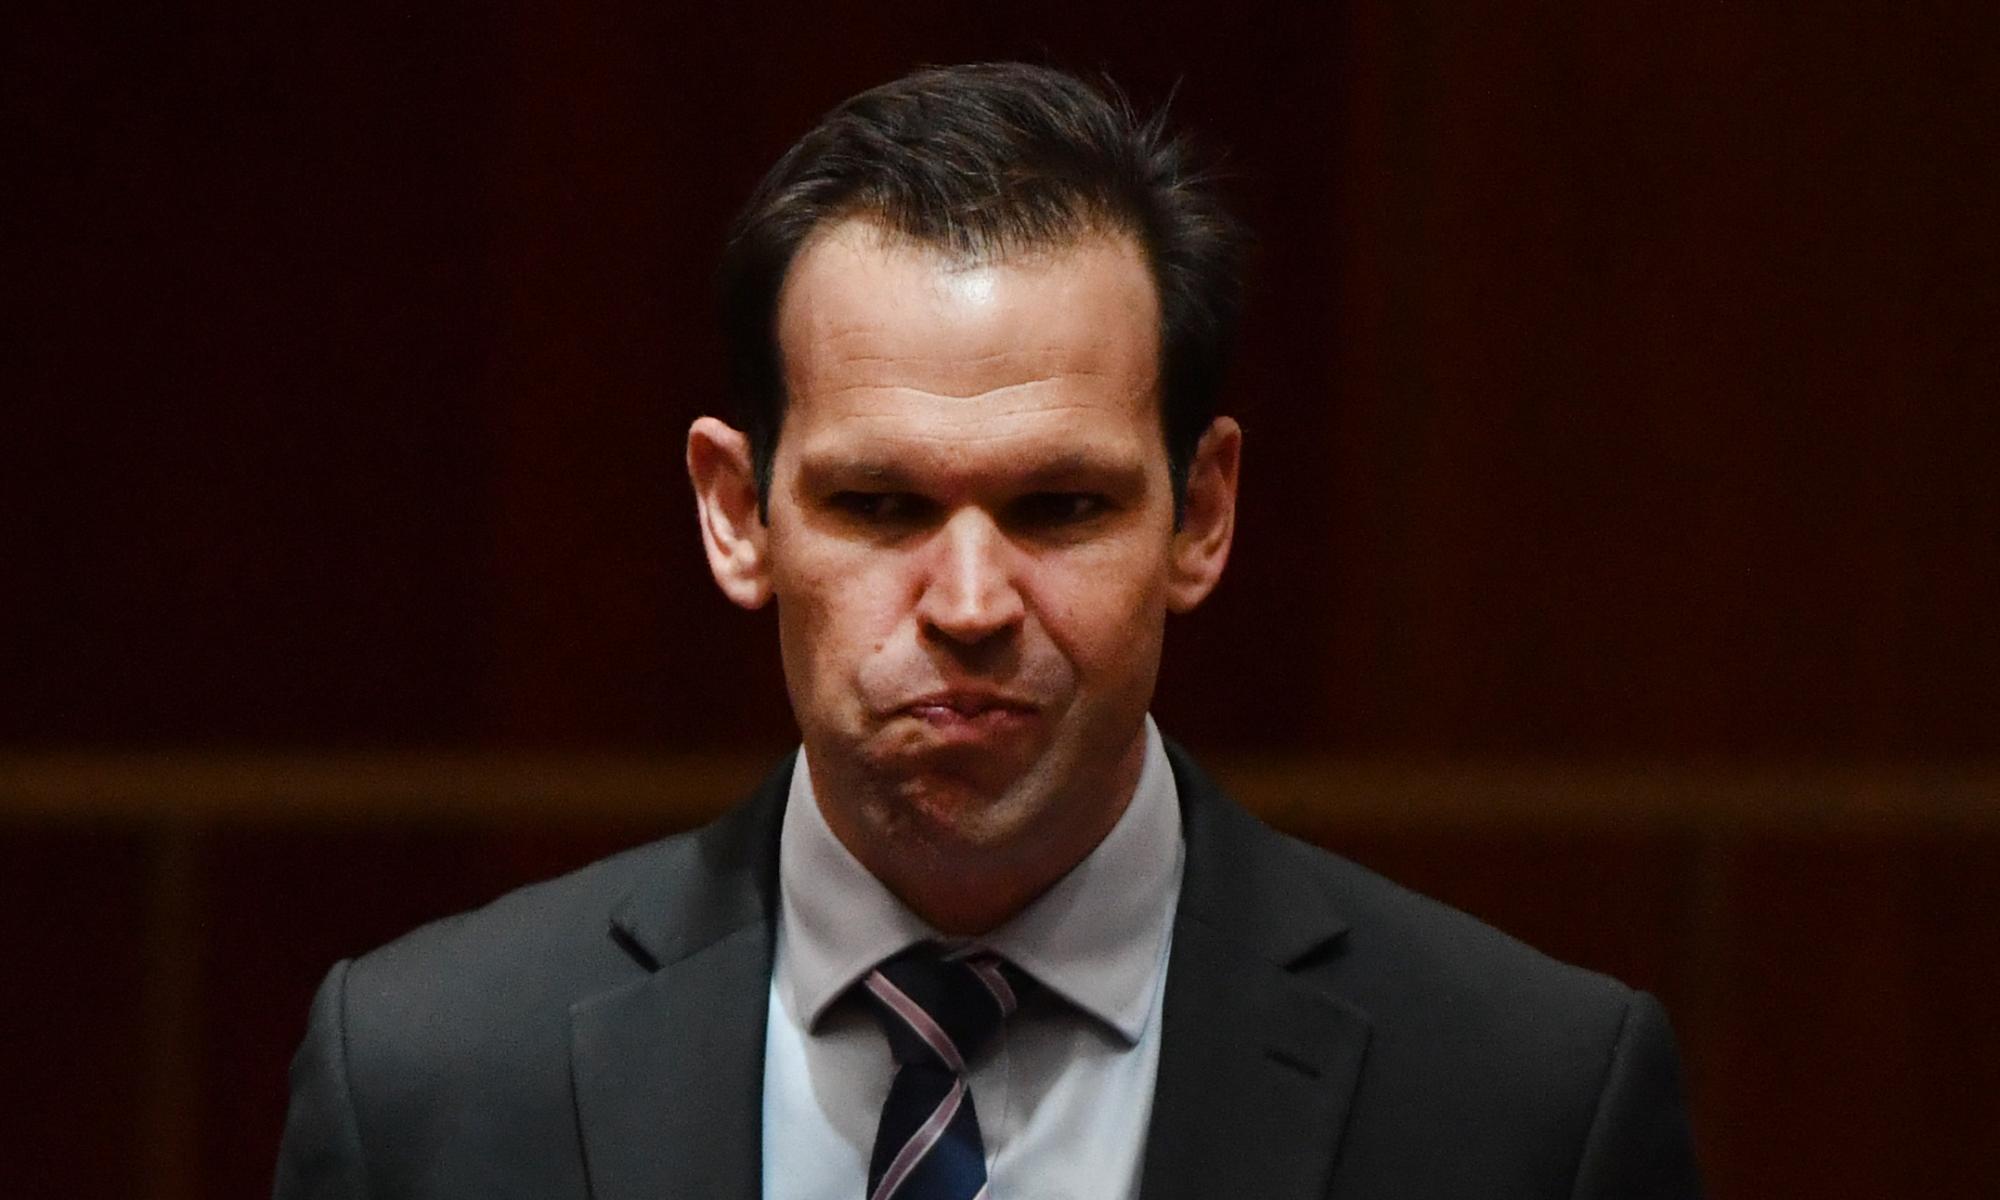 Canavan delayed releasing documents about coal lobby interactions before resigning